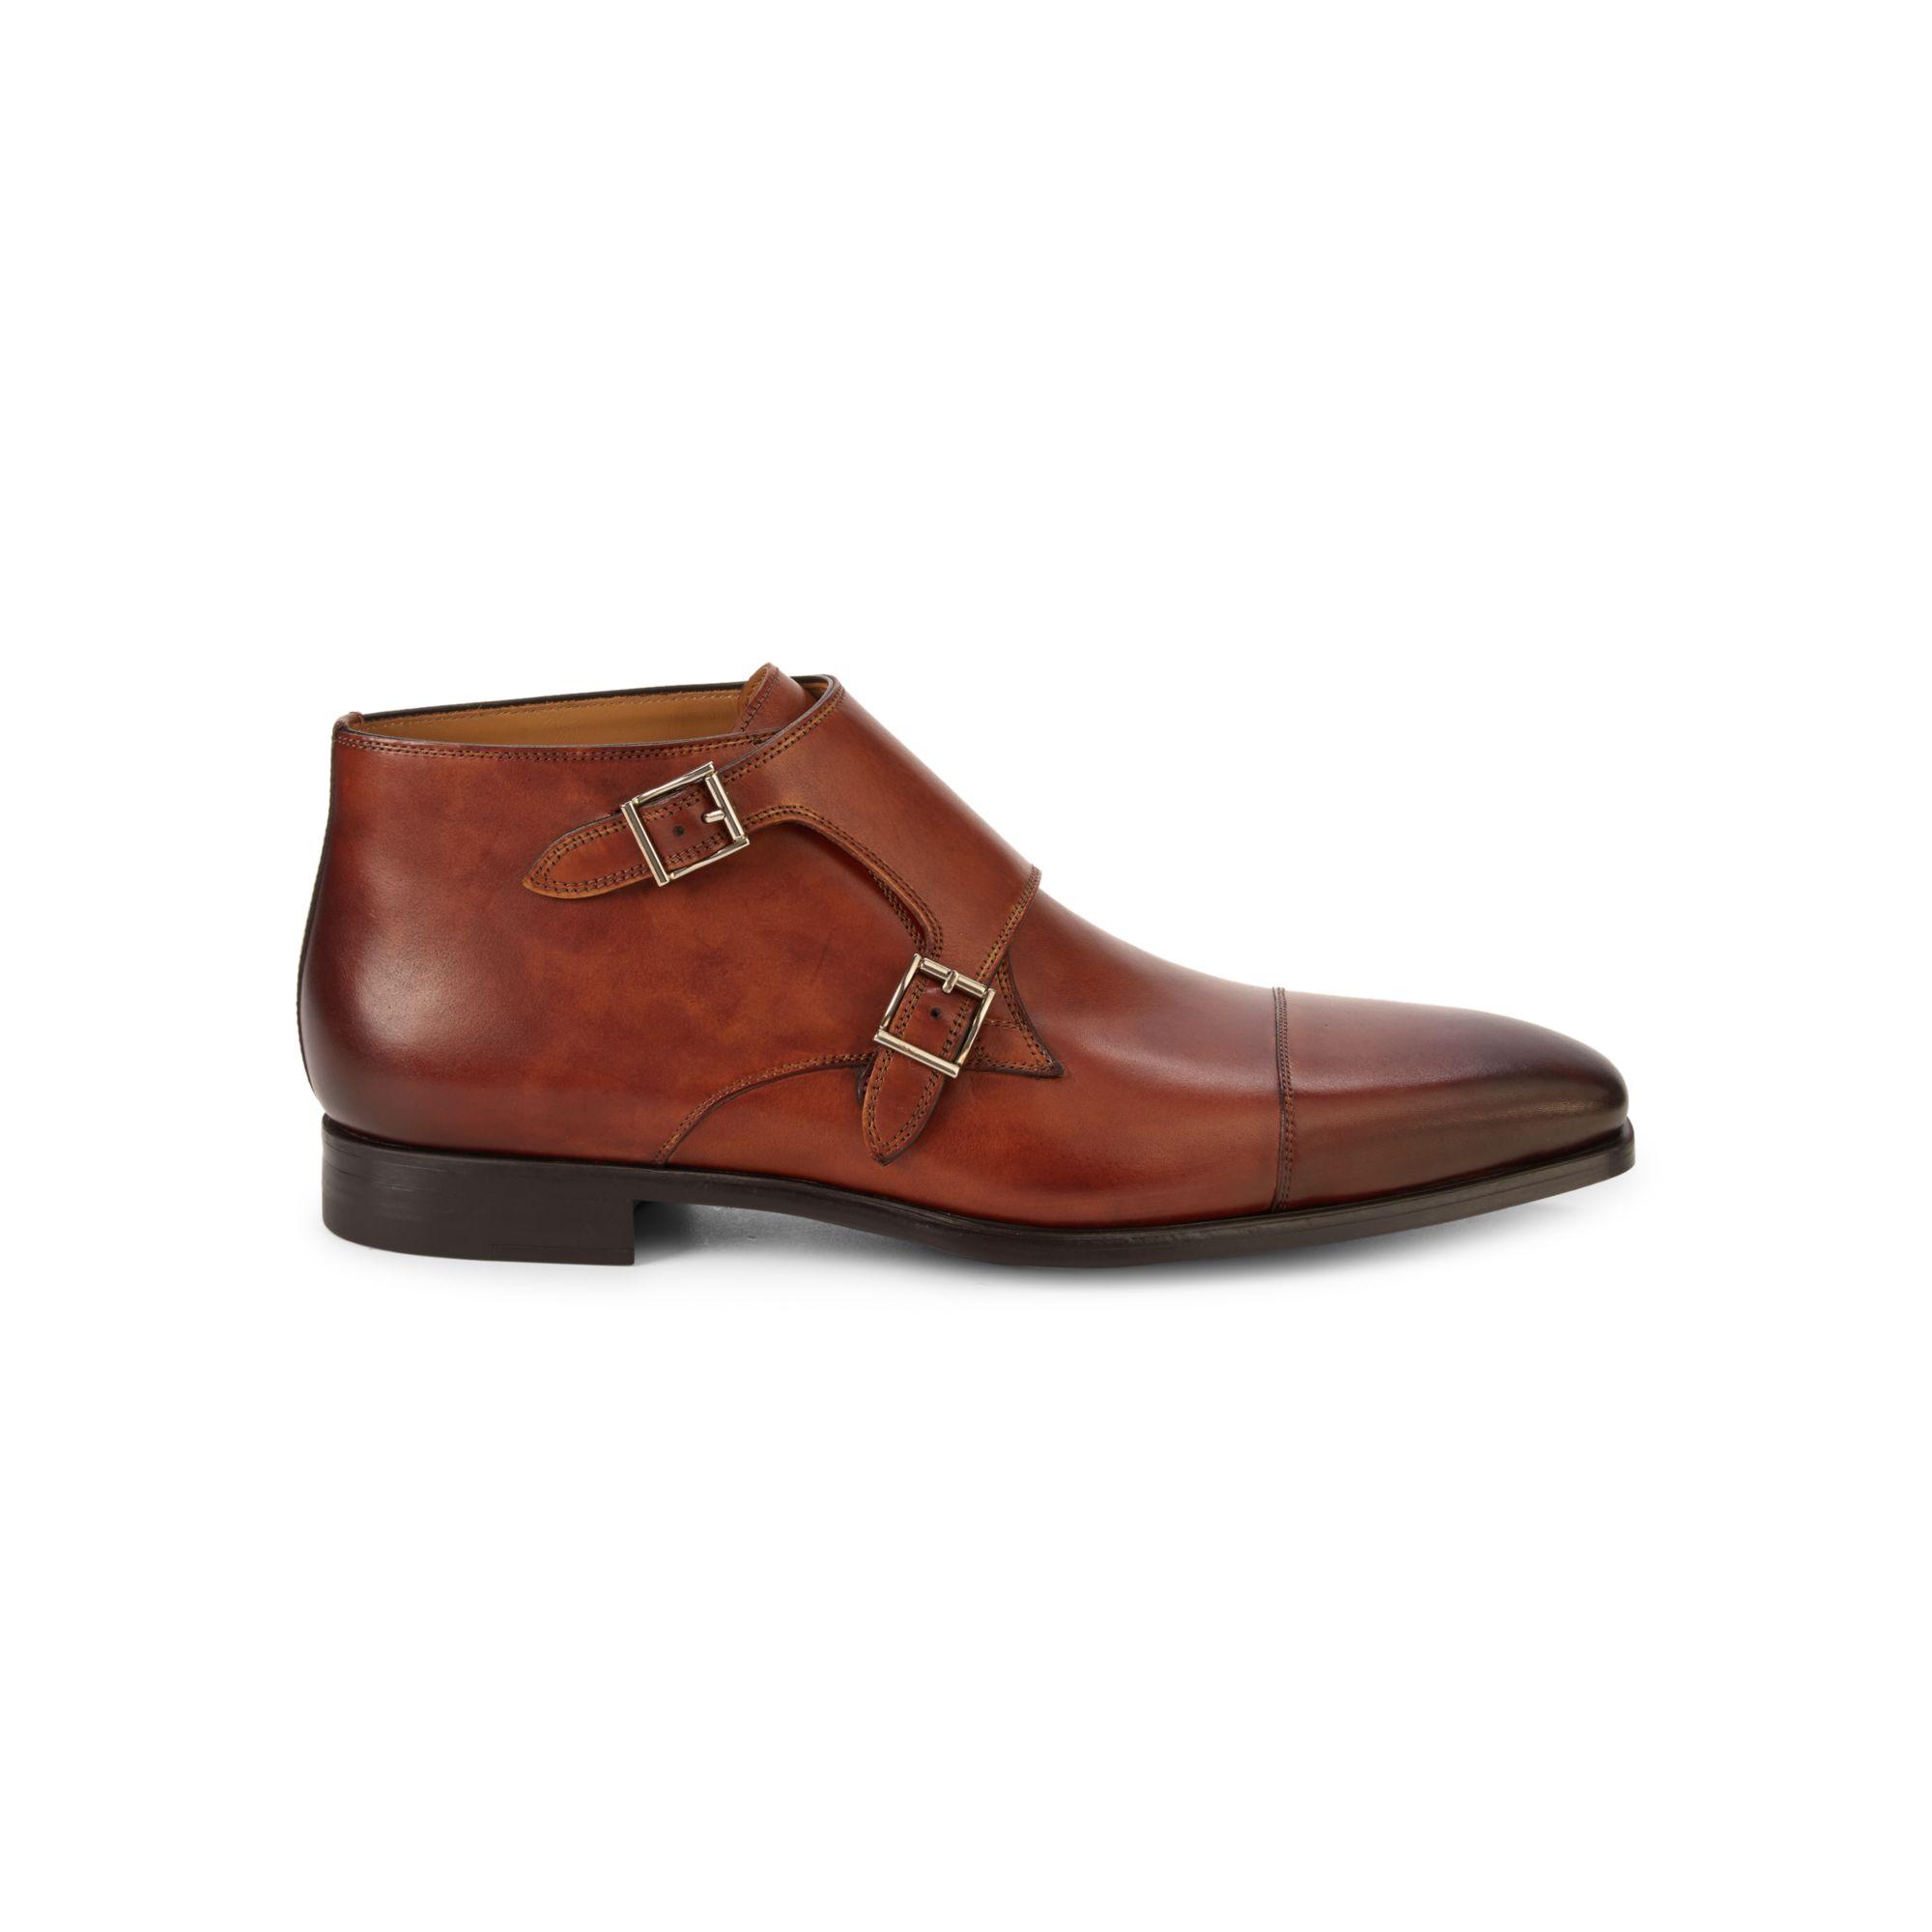 A Twist of Class: Magnanni Double Monk Strap Boot